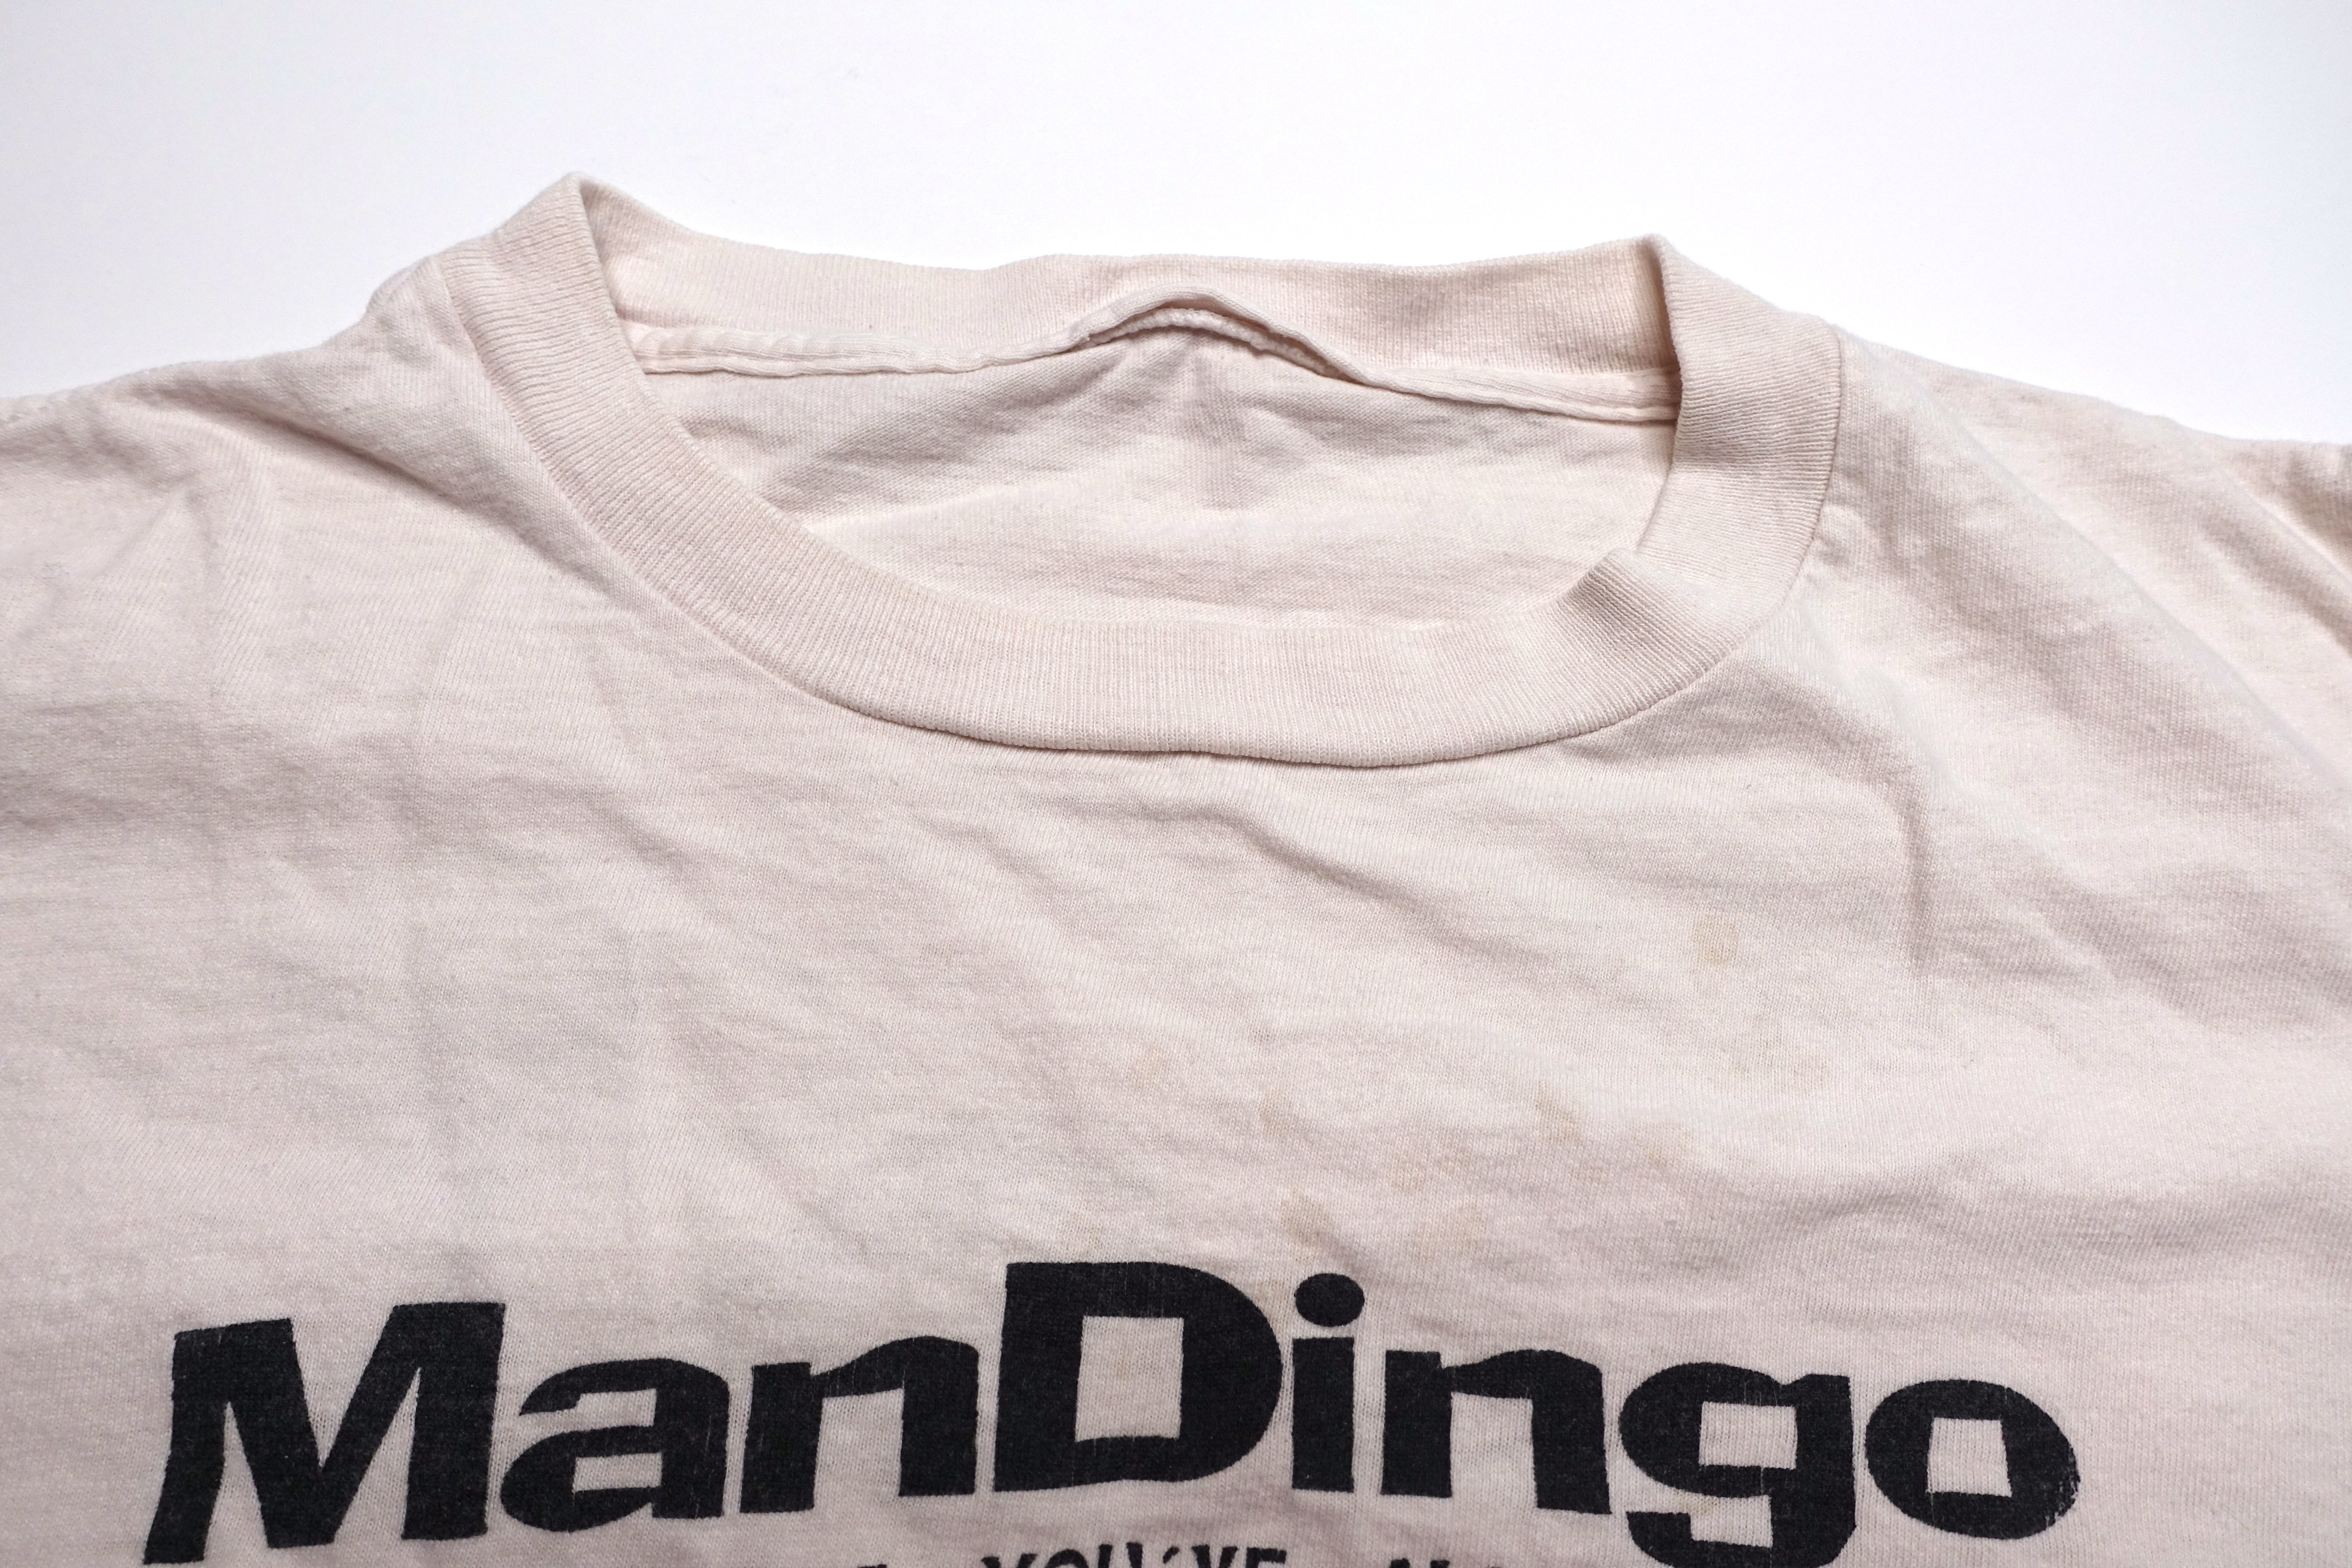 Man Dingo - All The Songs You've Always Hated 1995 Tour Shirt Size XL